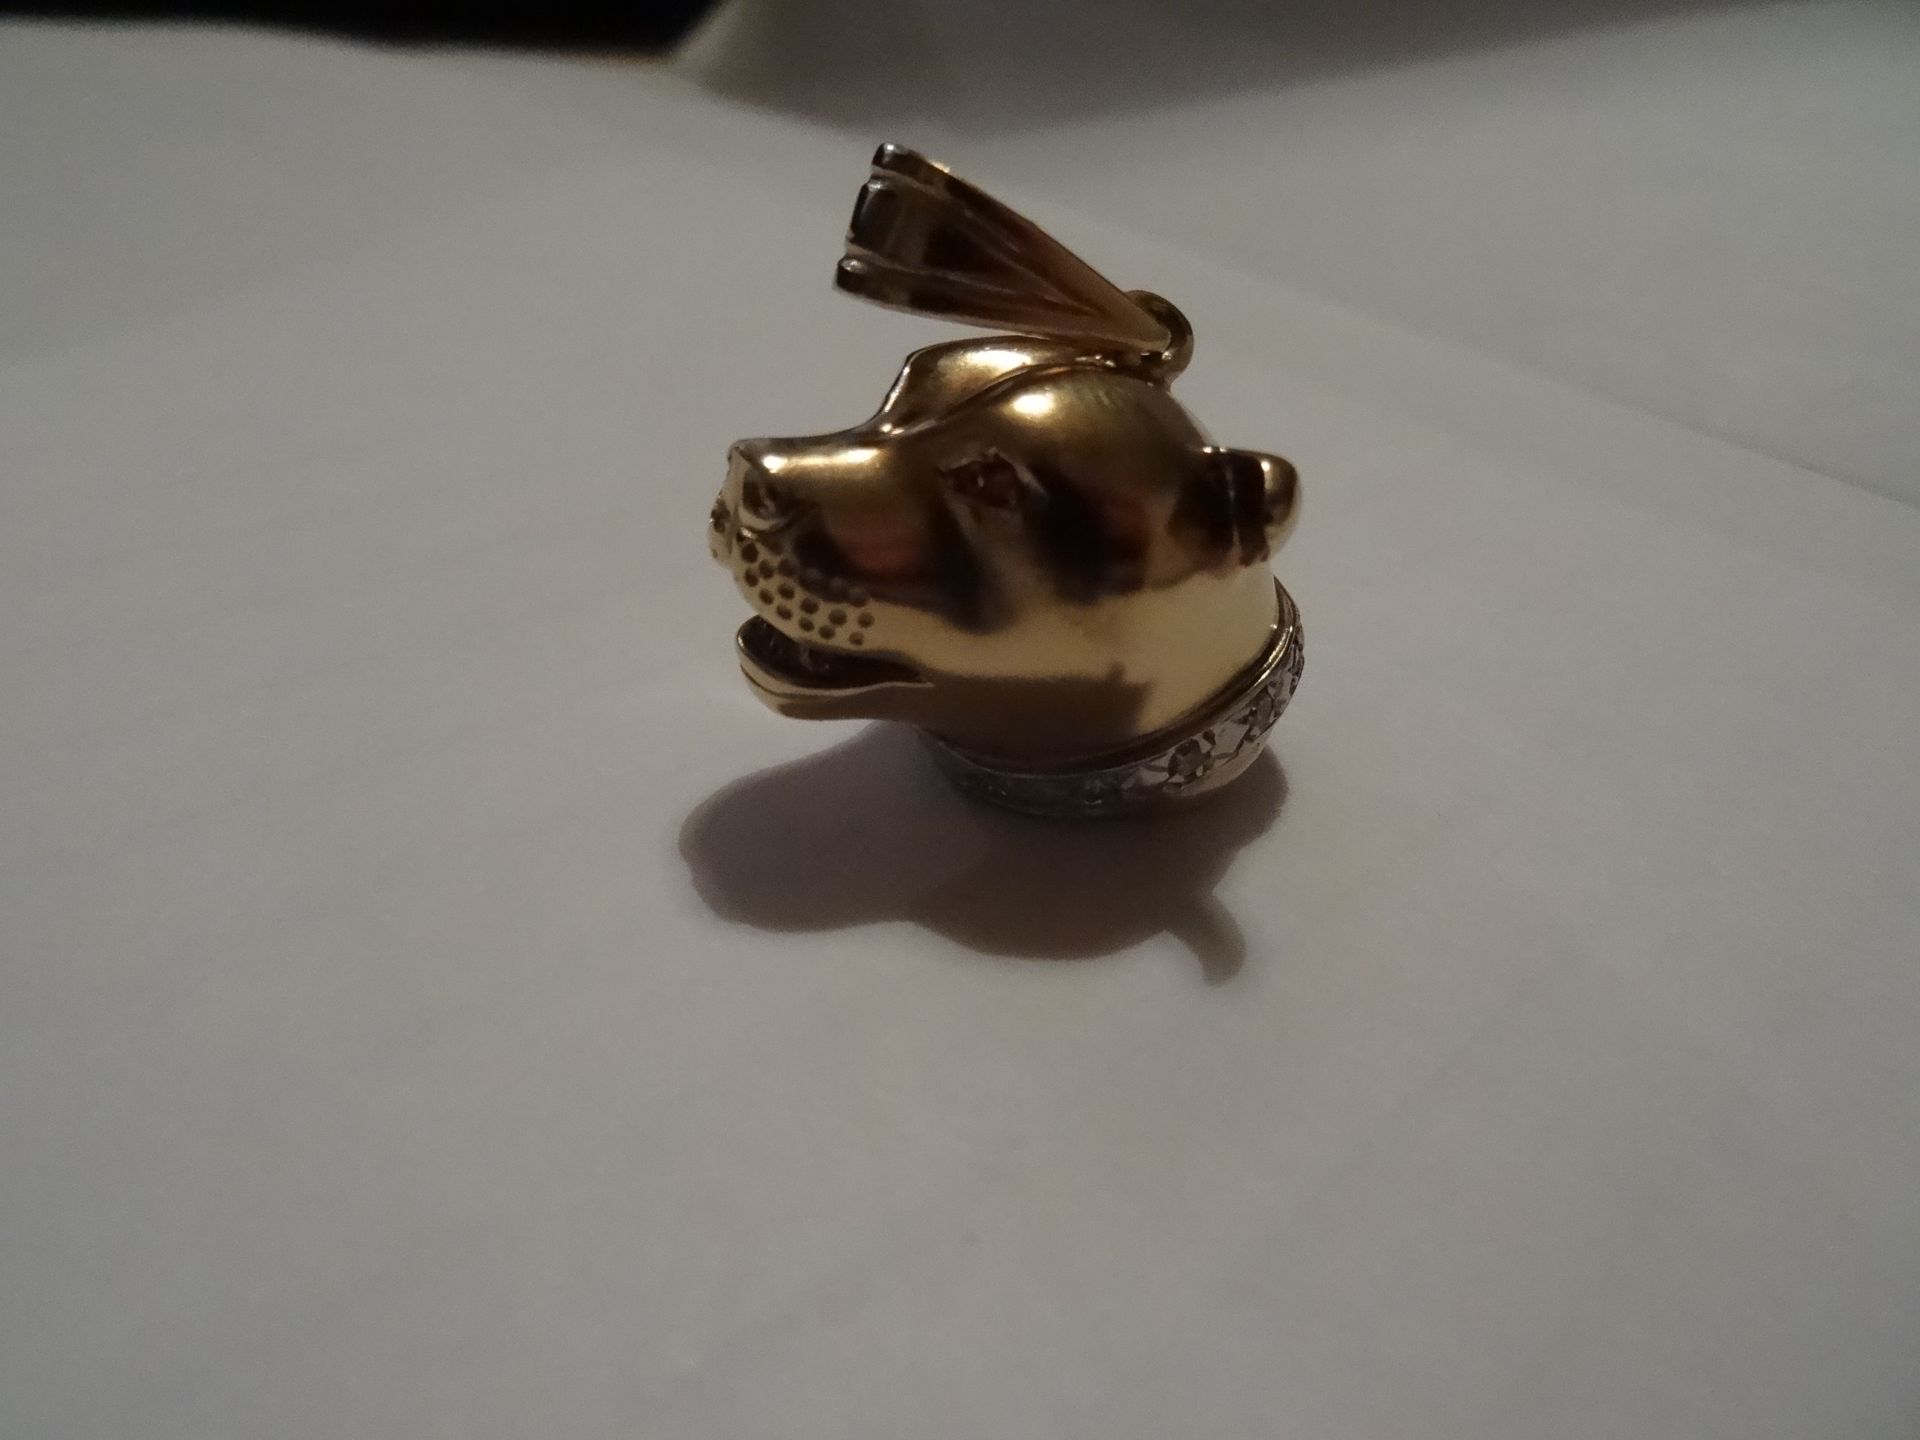 9 CARAT YELLOW GOLD, MOVeABLE DOGS HEAD PENDANT